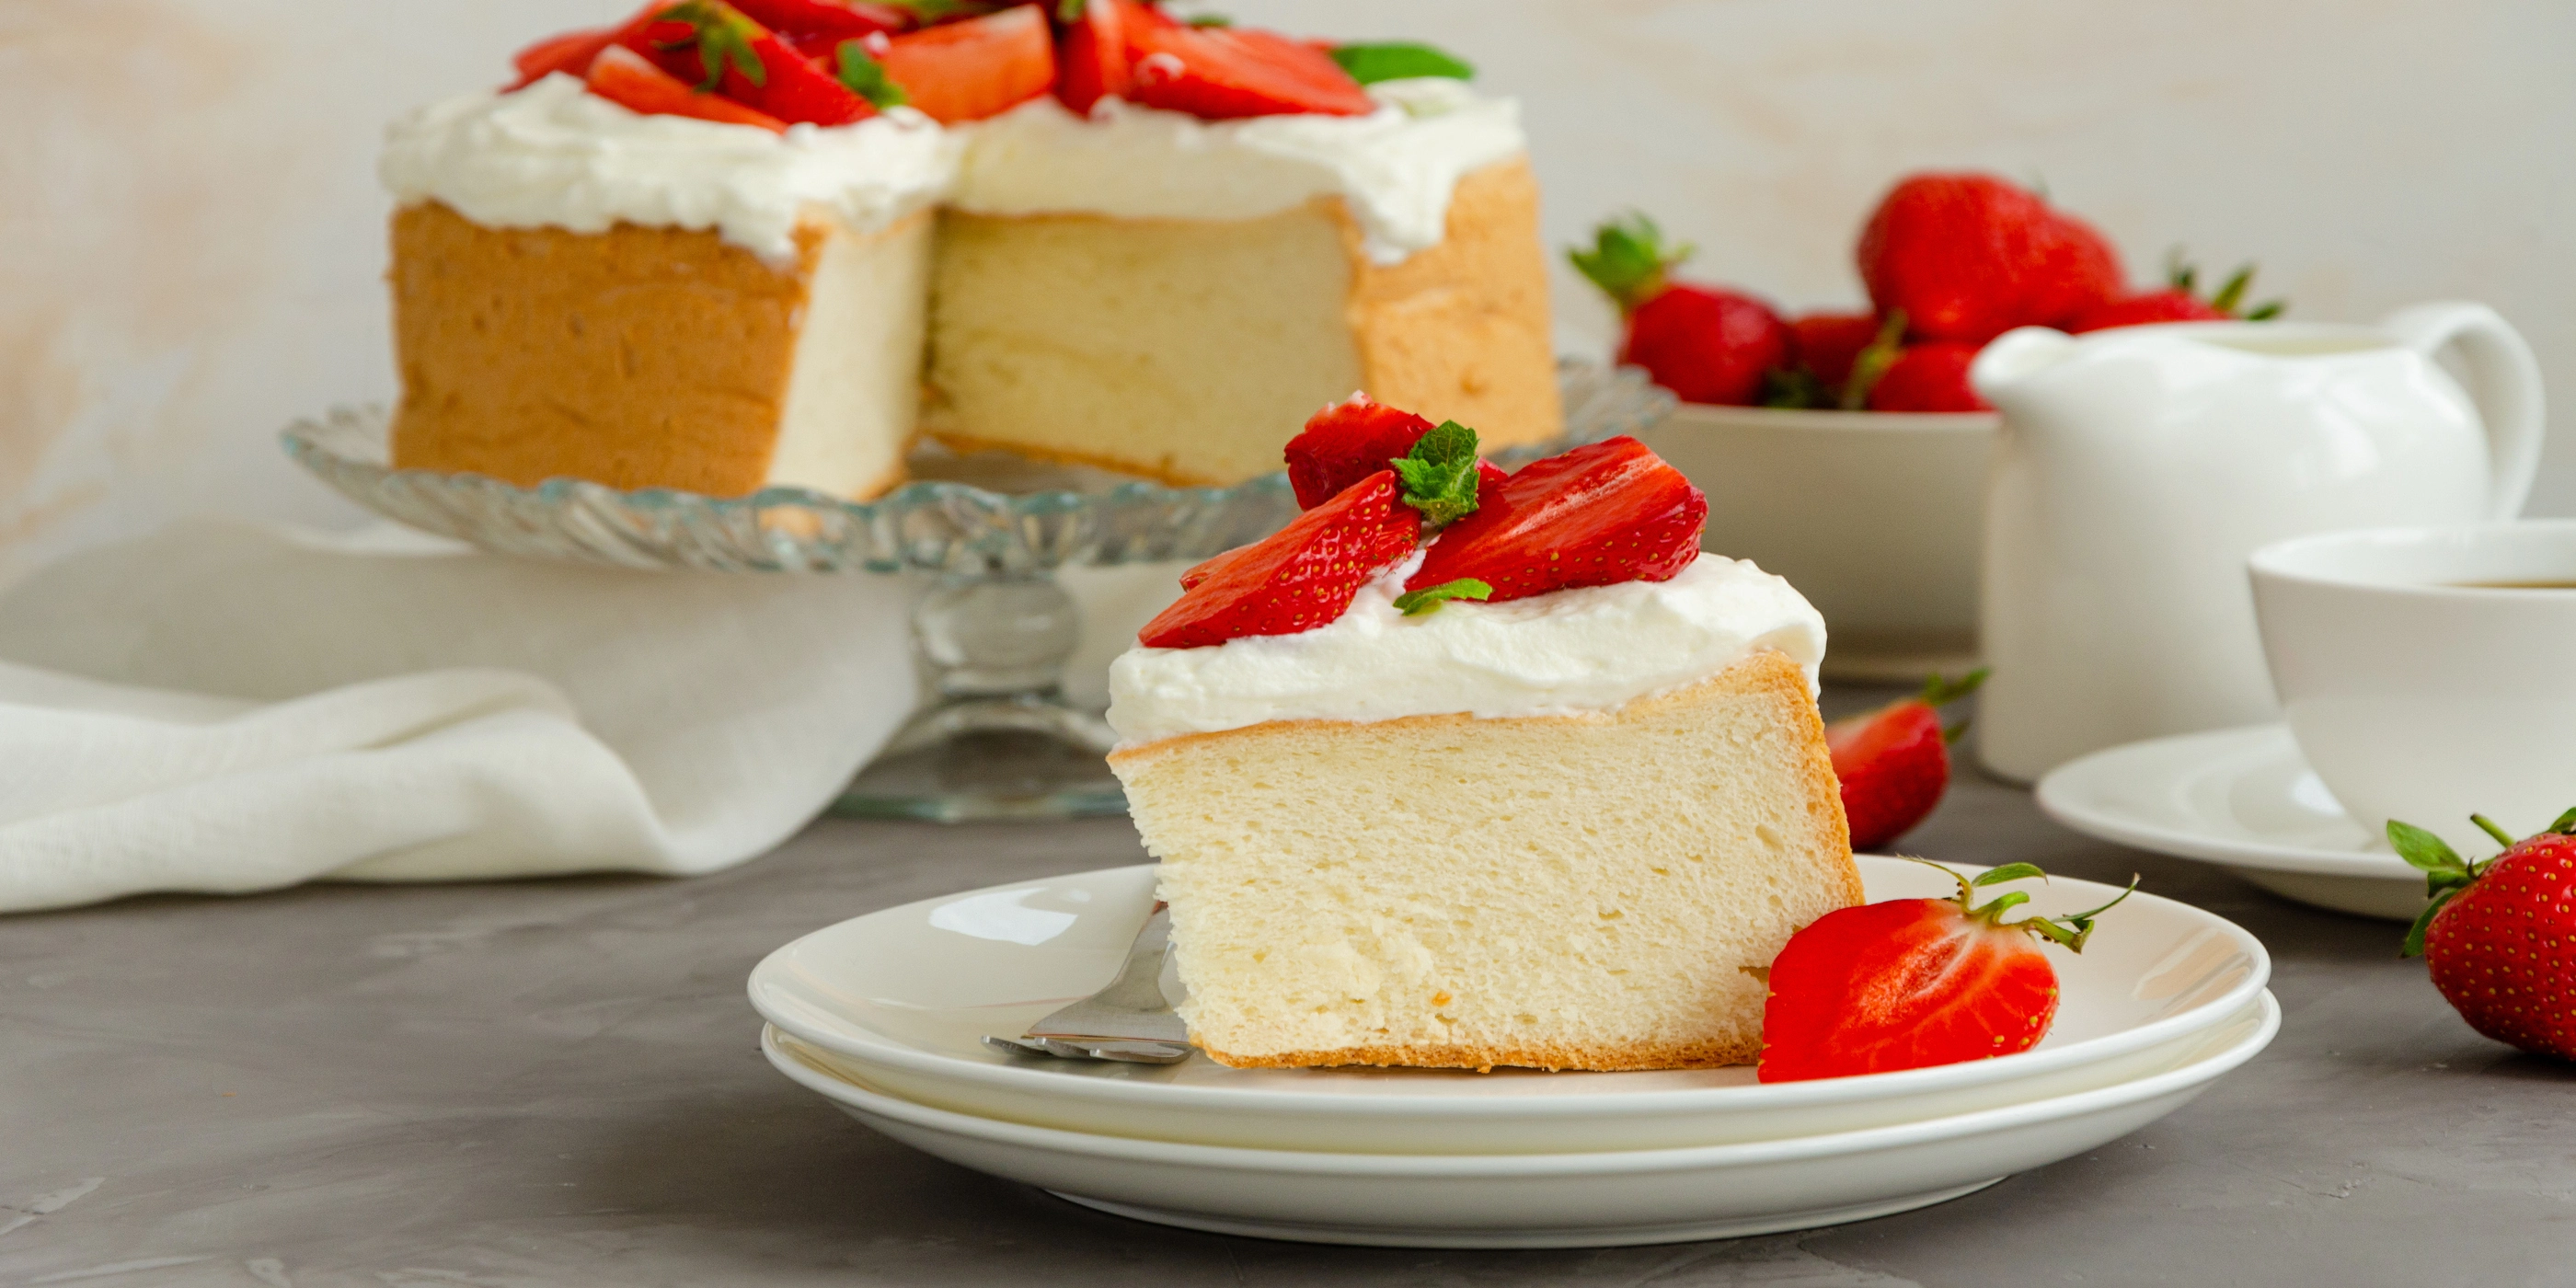 Angel food cake with whipped cream and slices of fresh strawberries on top on a concrete background. Summer dessert. Horizontal orientation, copy space